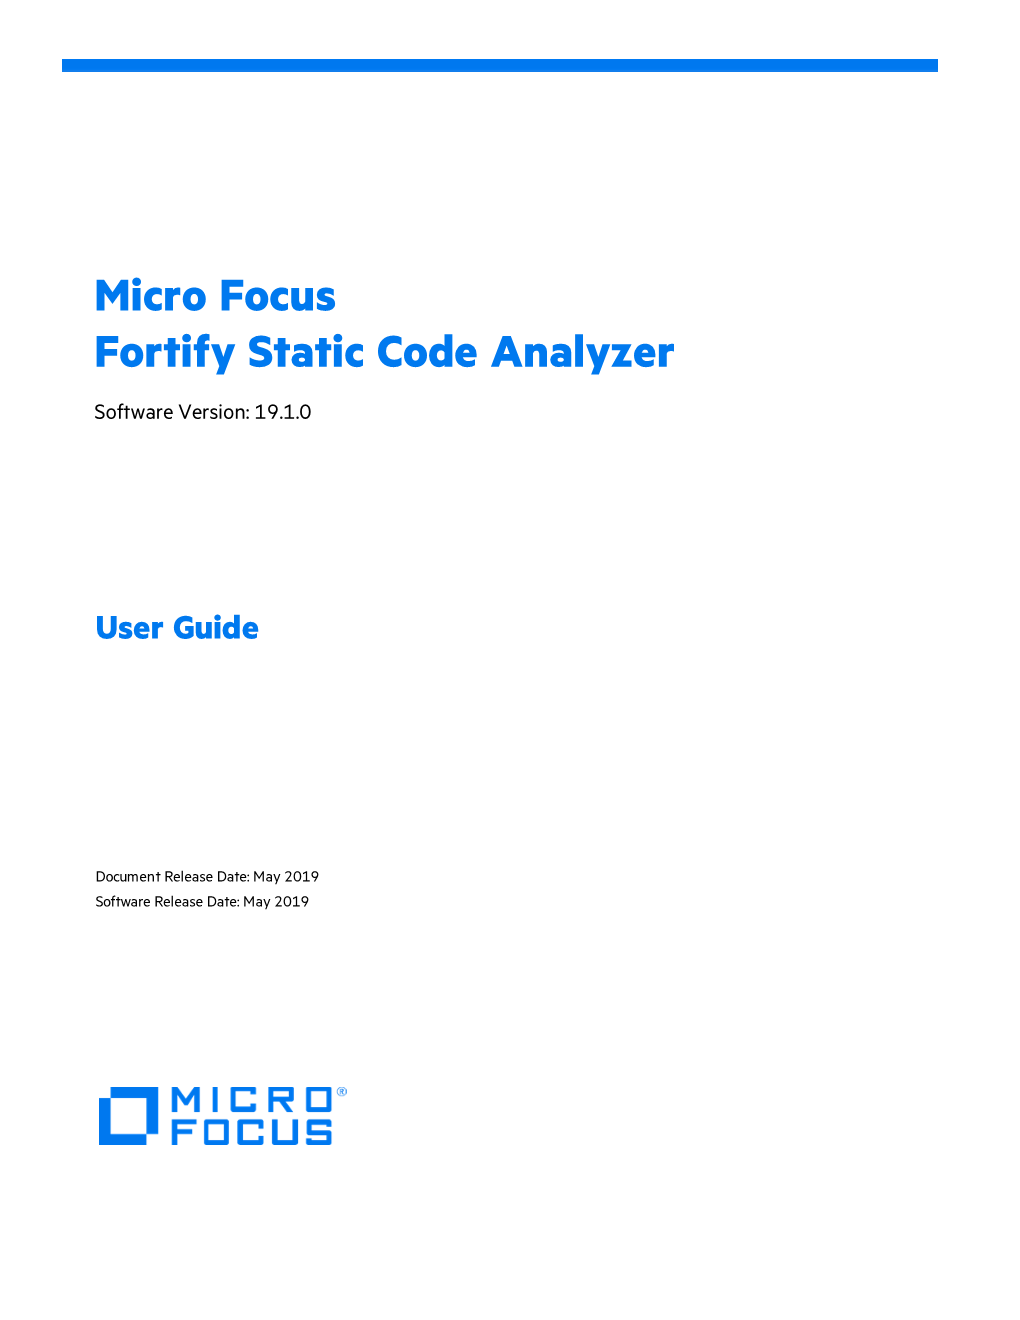 Micro Focus Fortify Static Code Analyzer User Guide